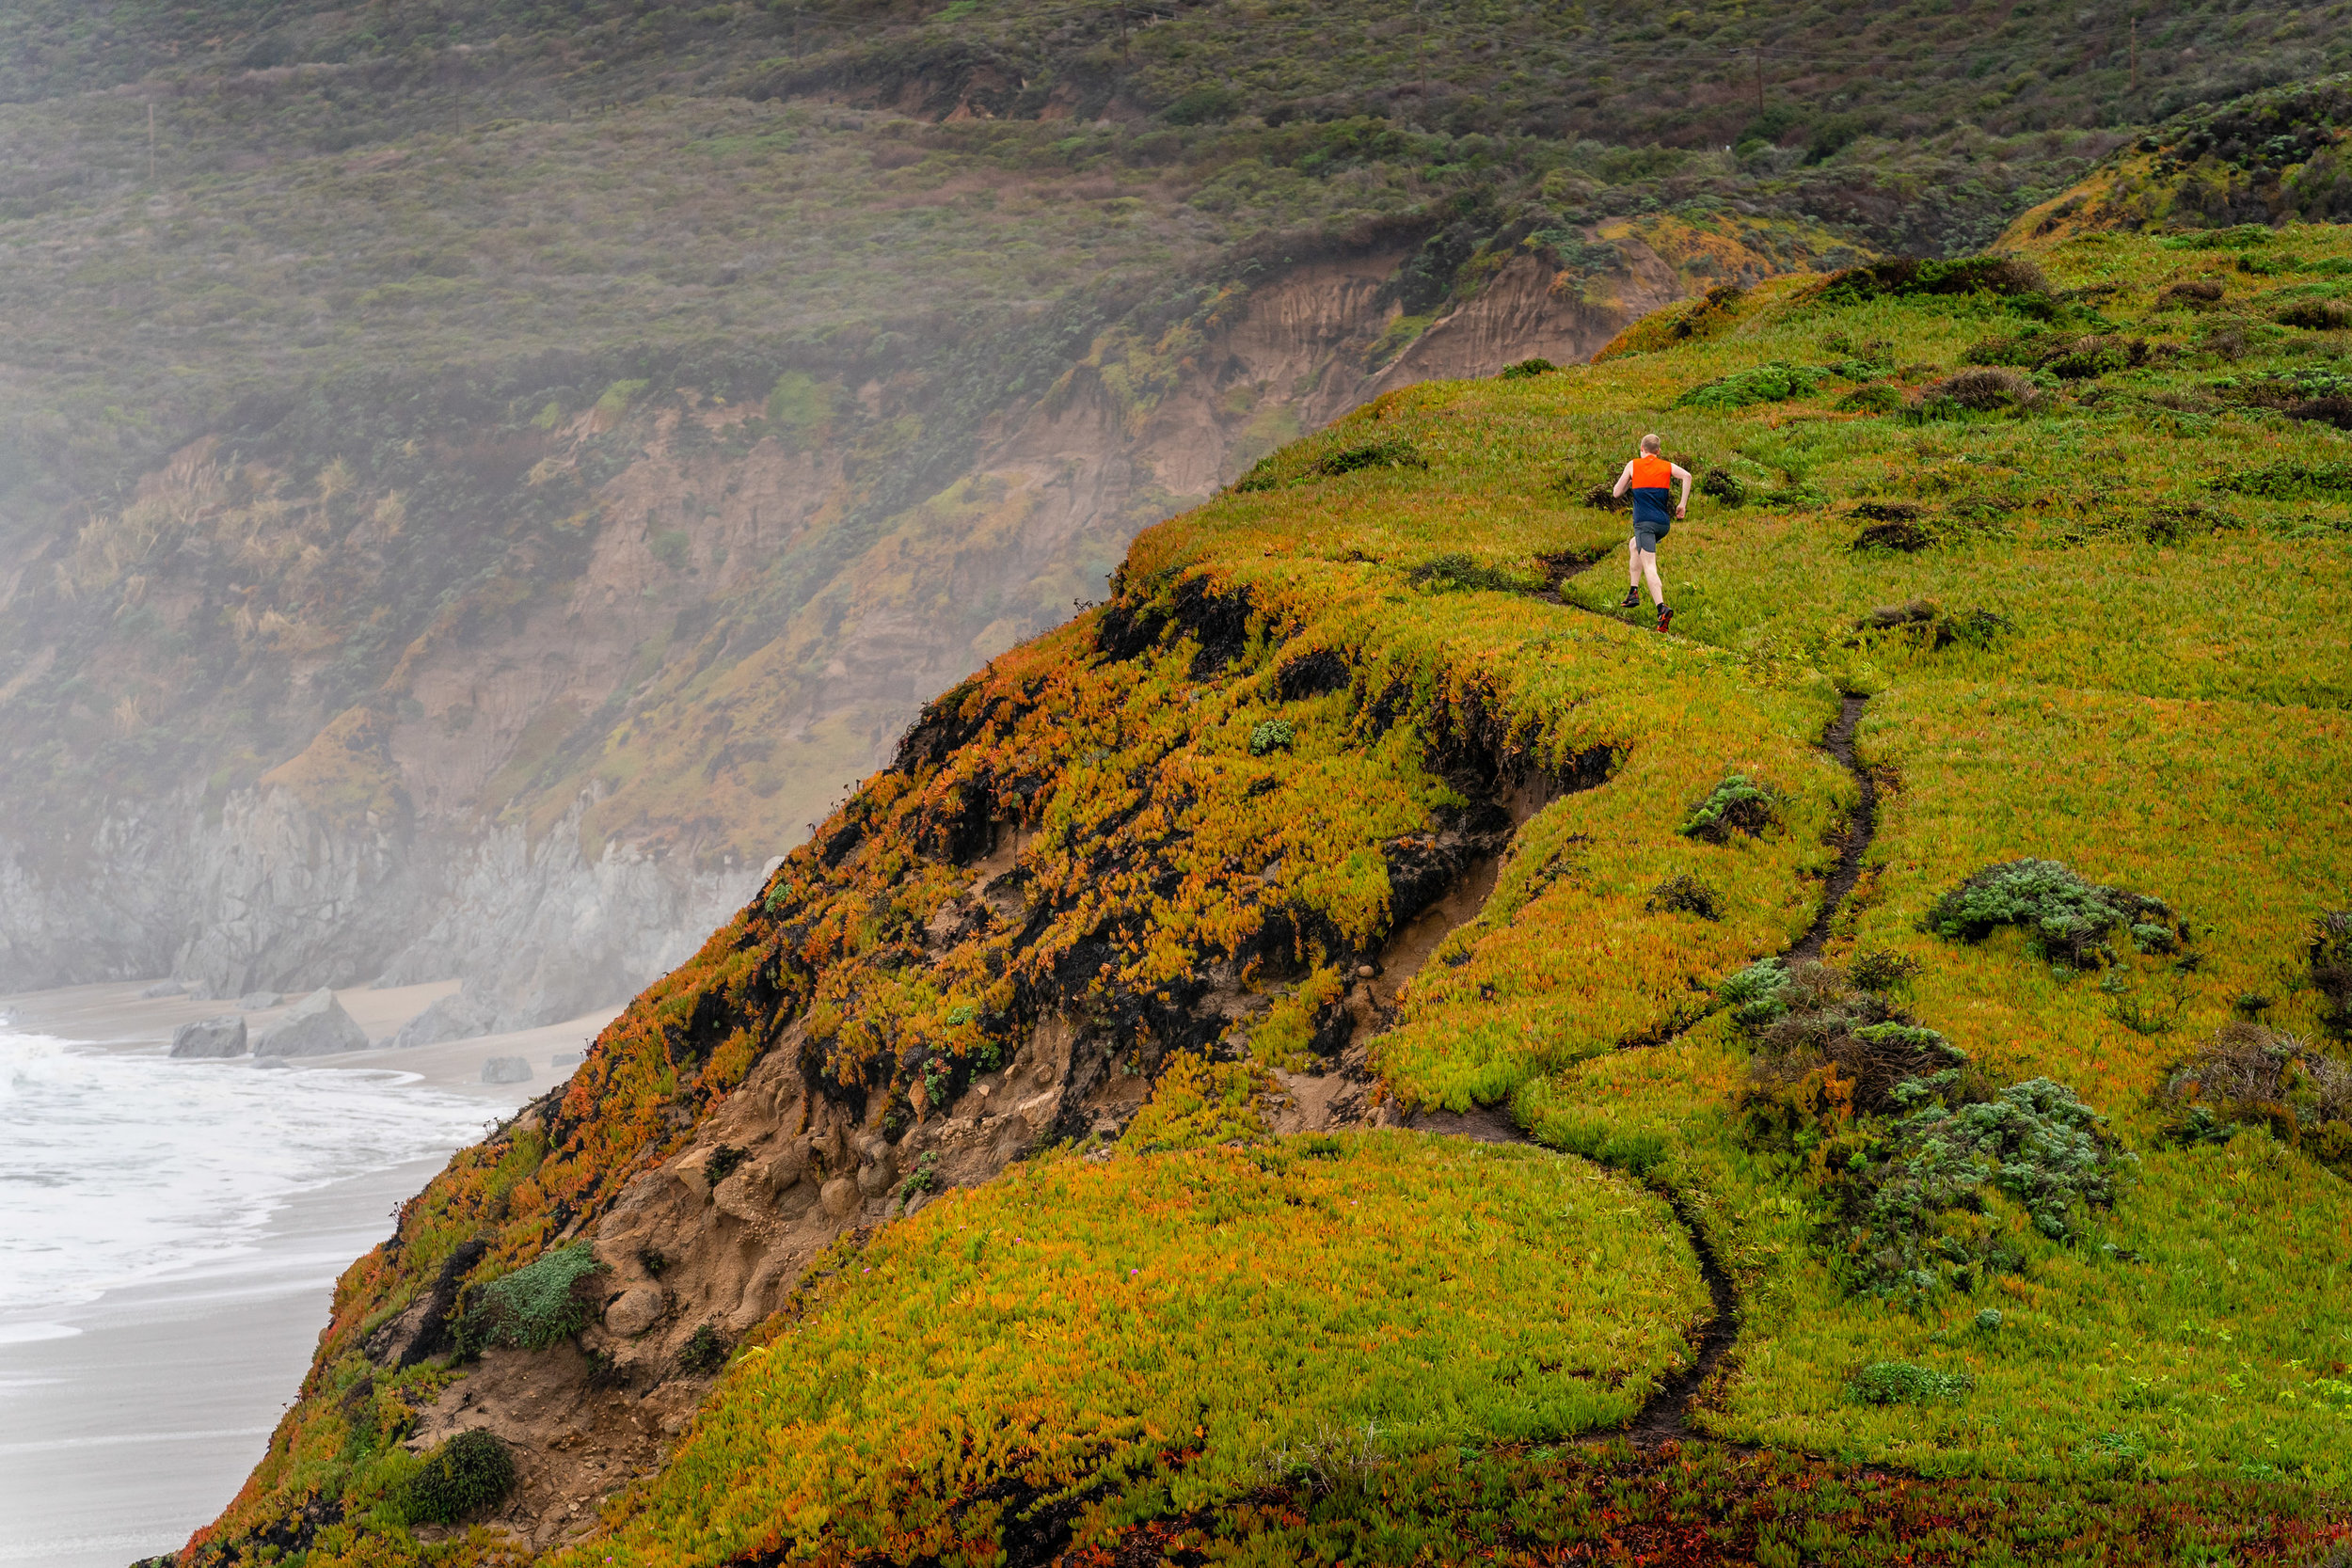  Adventure: Road and trail running along the Big Sur Coast, California 